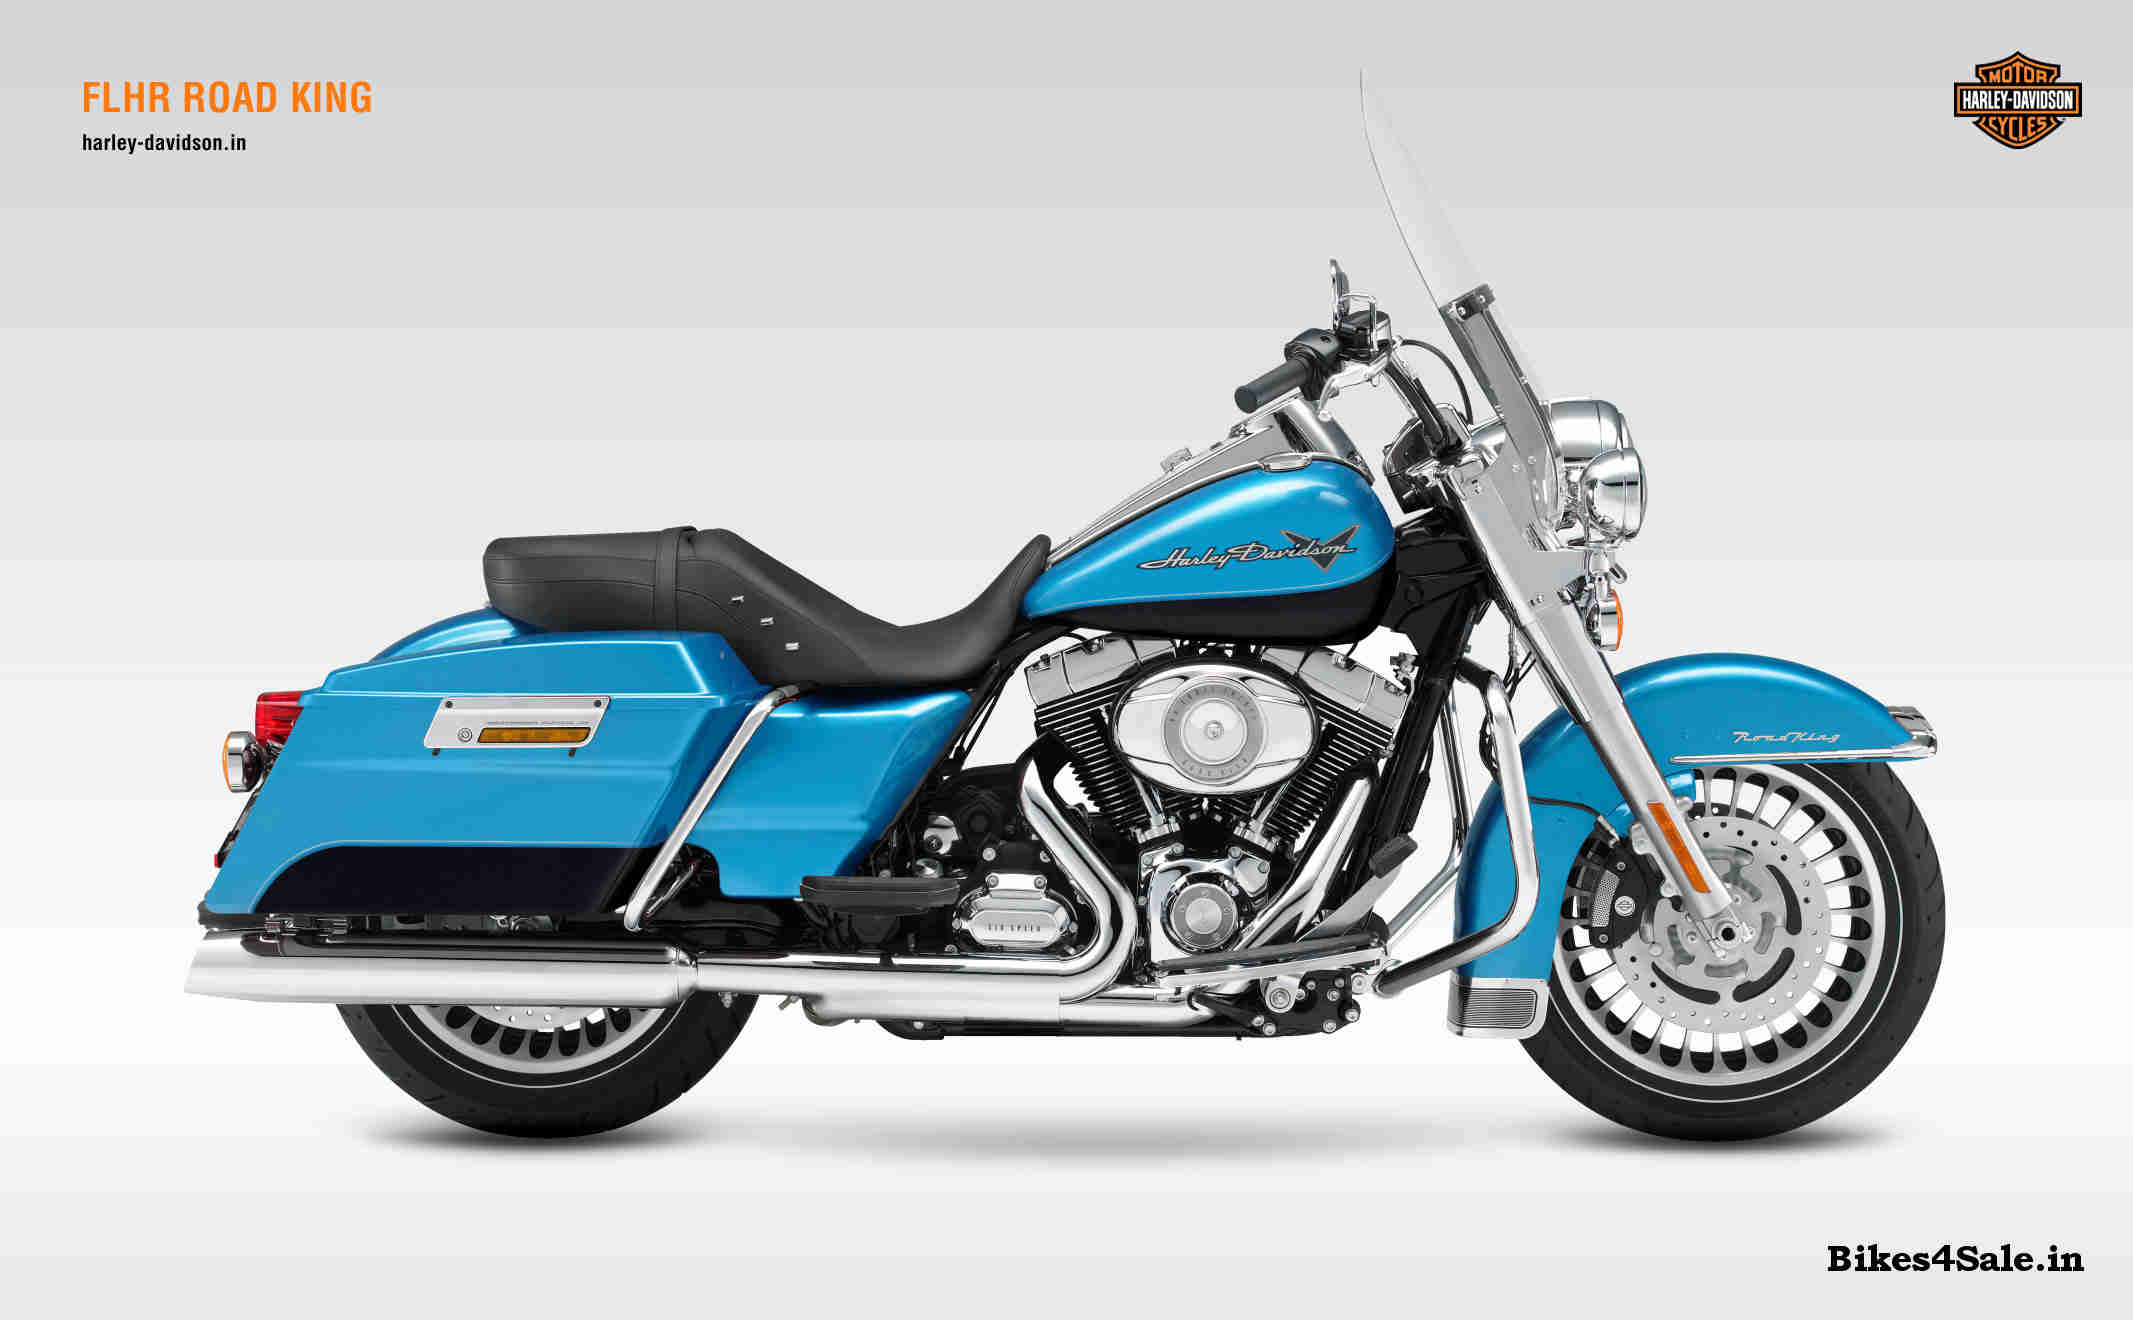 Harley Davidson Touring Flhr Road King Price Specs Mileage Colours Photos And Reviews Bikes4sale